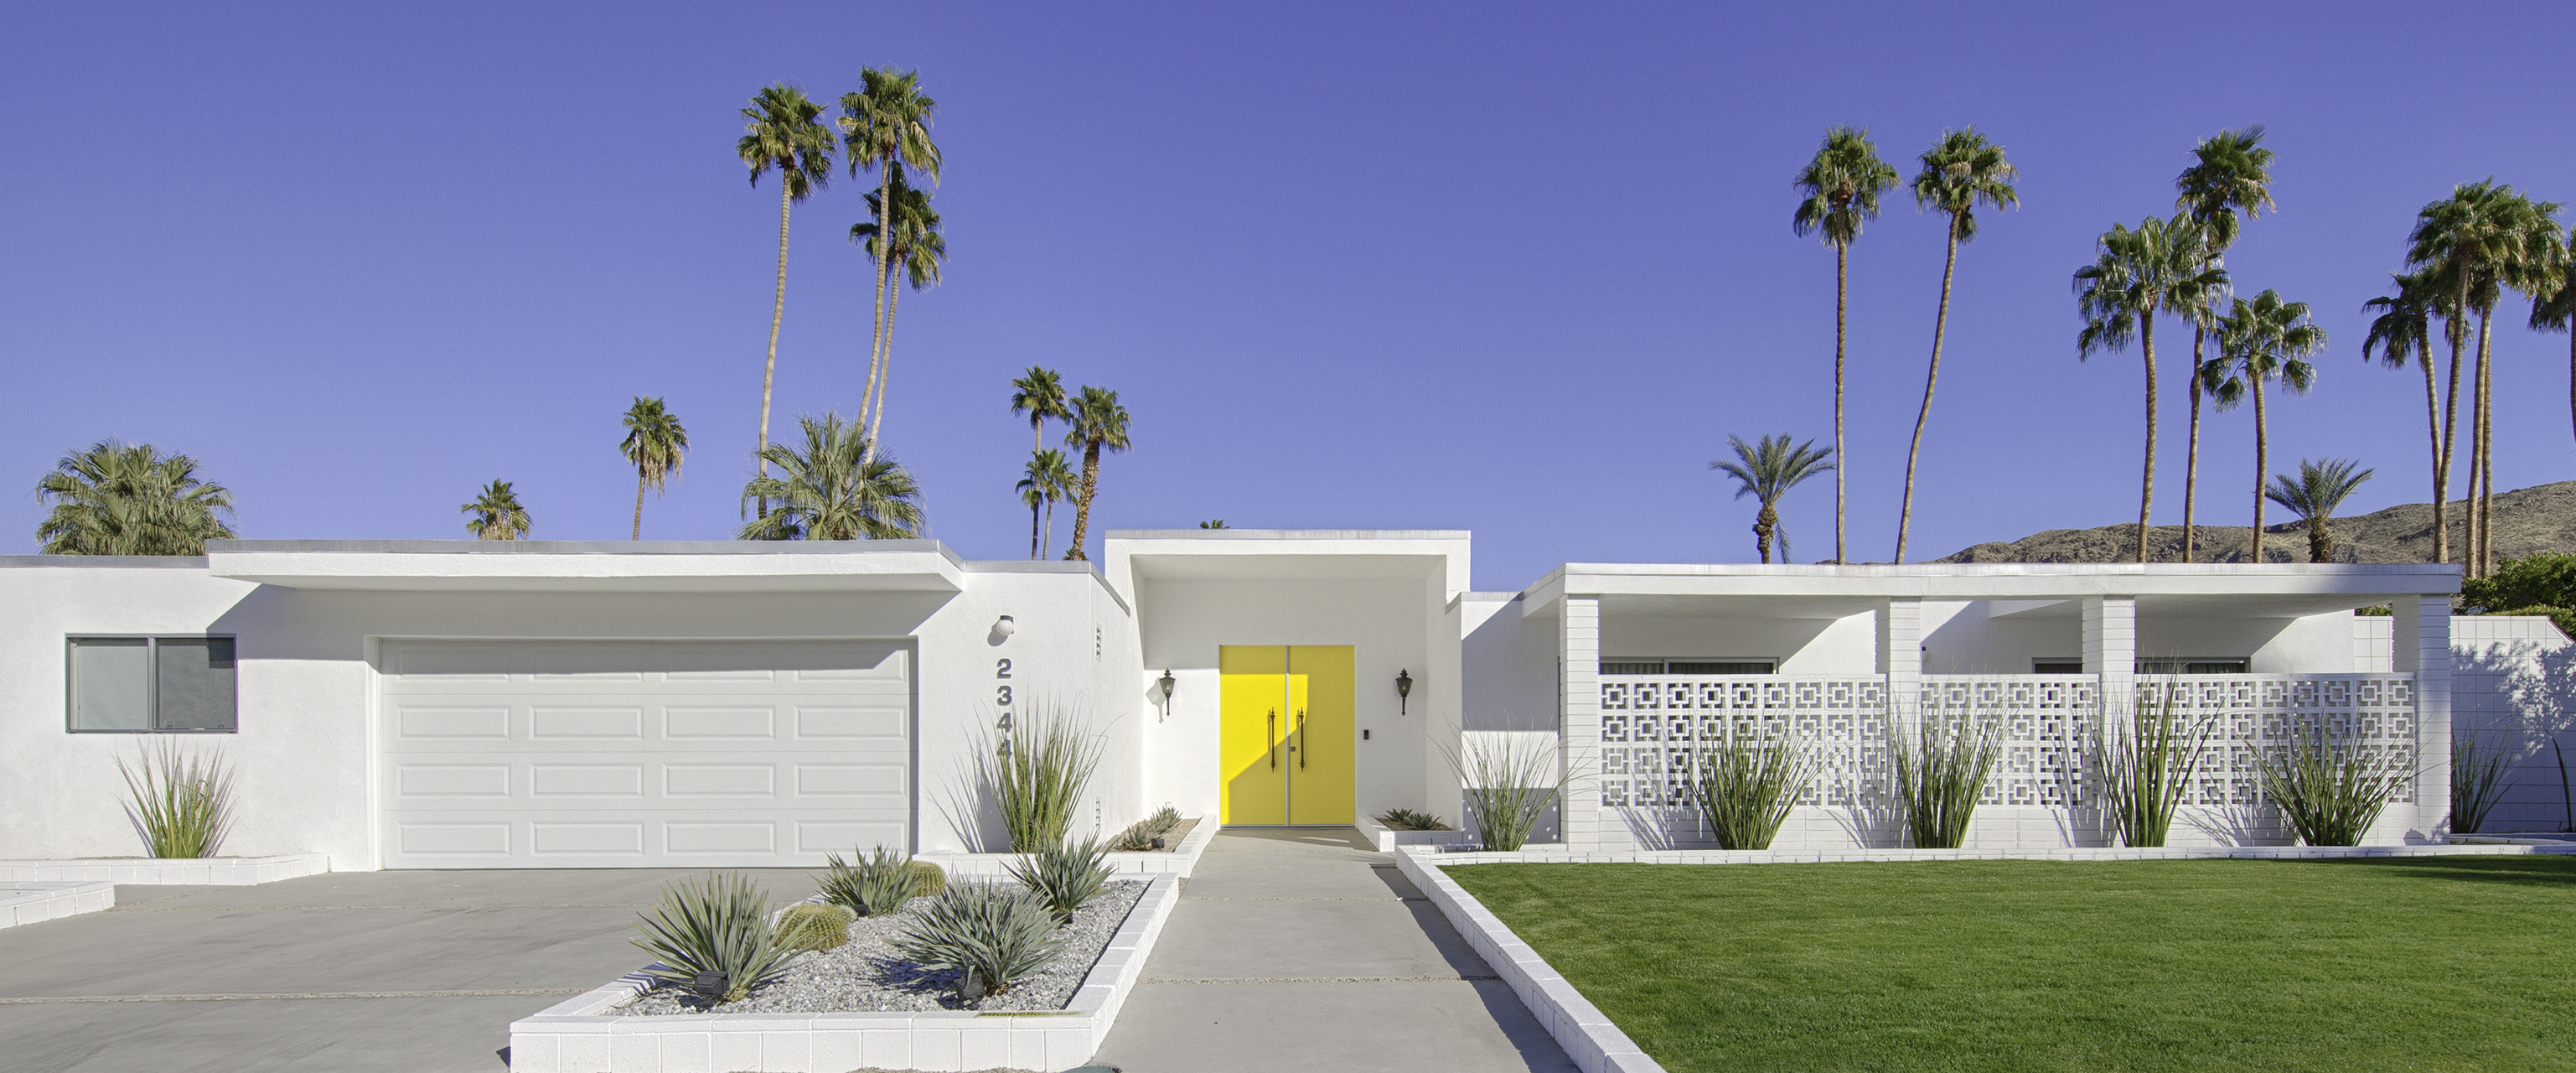 vacation homes in palm springs, coachella valley real estate